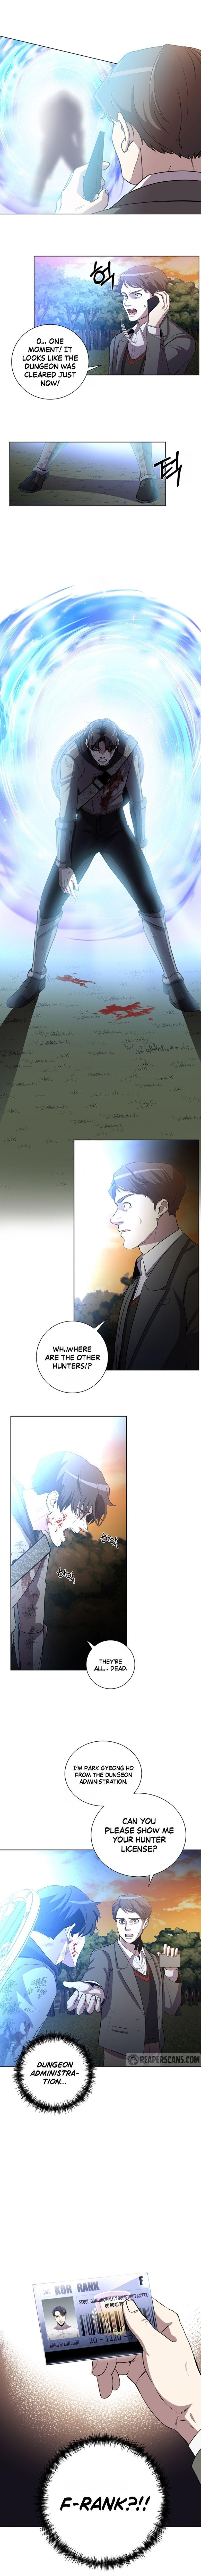 990k Ex-Life Hunter - Chapter 6 Page 8